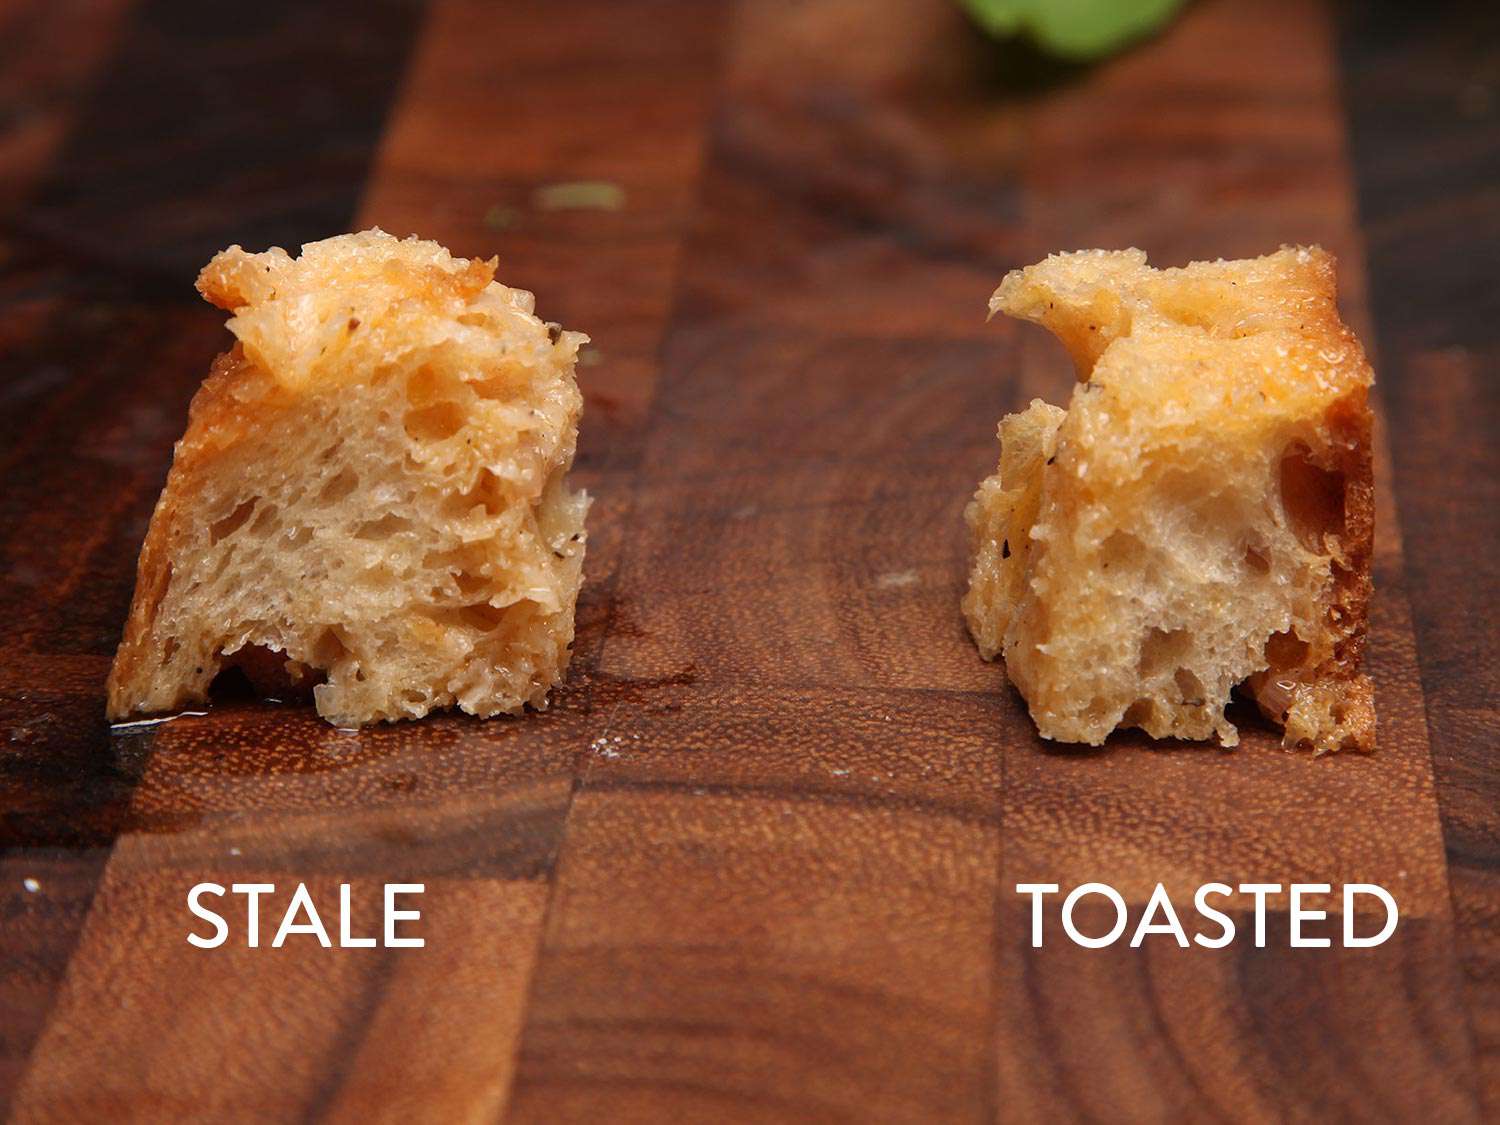 A comparison of two cubes of crusty bread, one stale and one toasted, showing how they absorb moisture differently